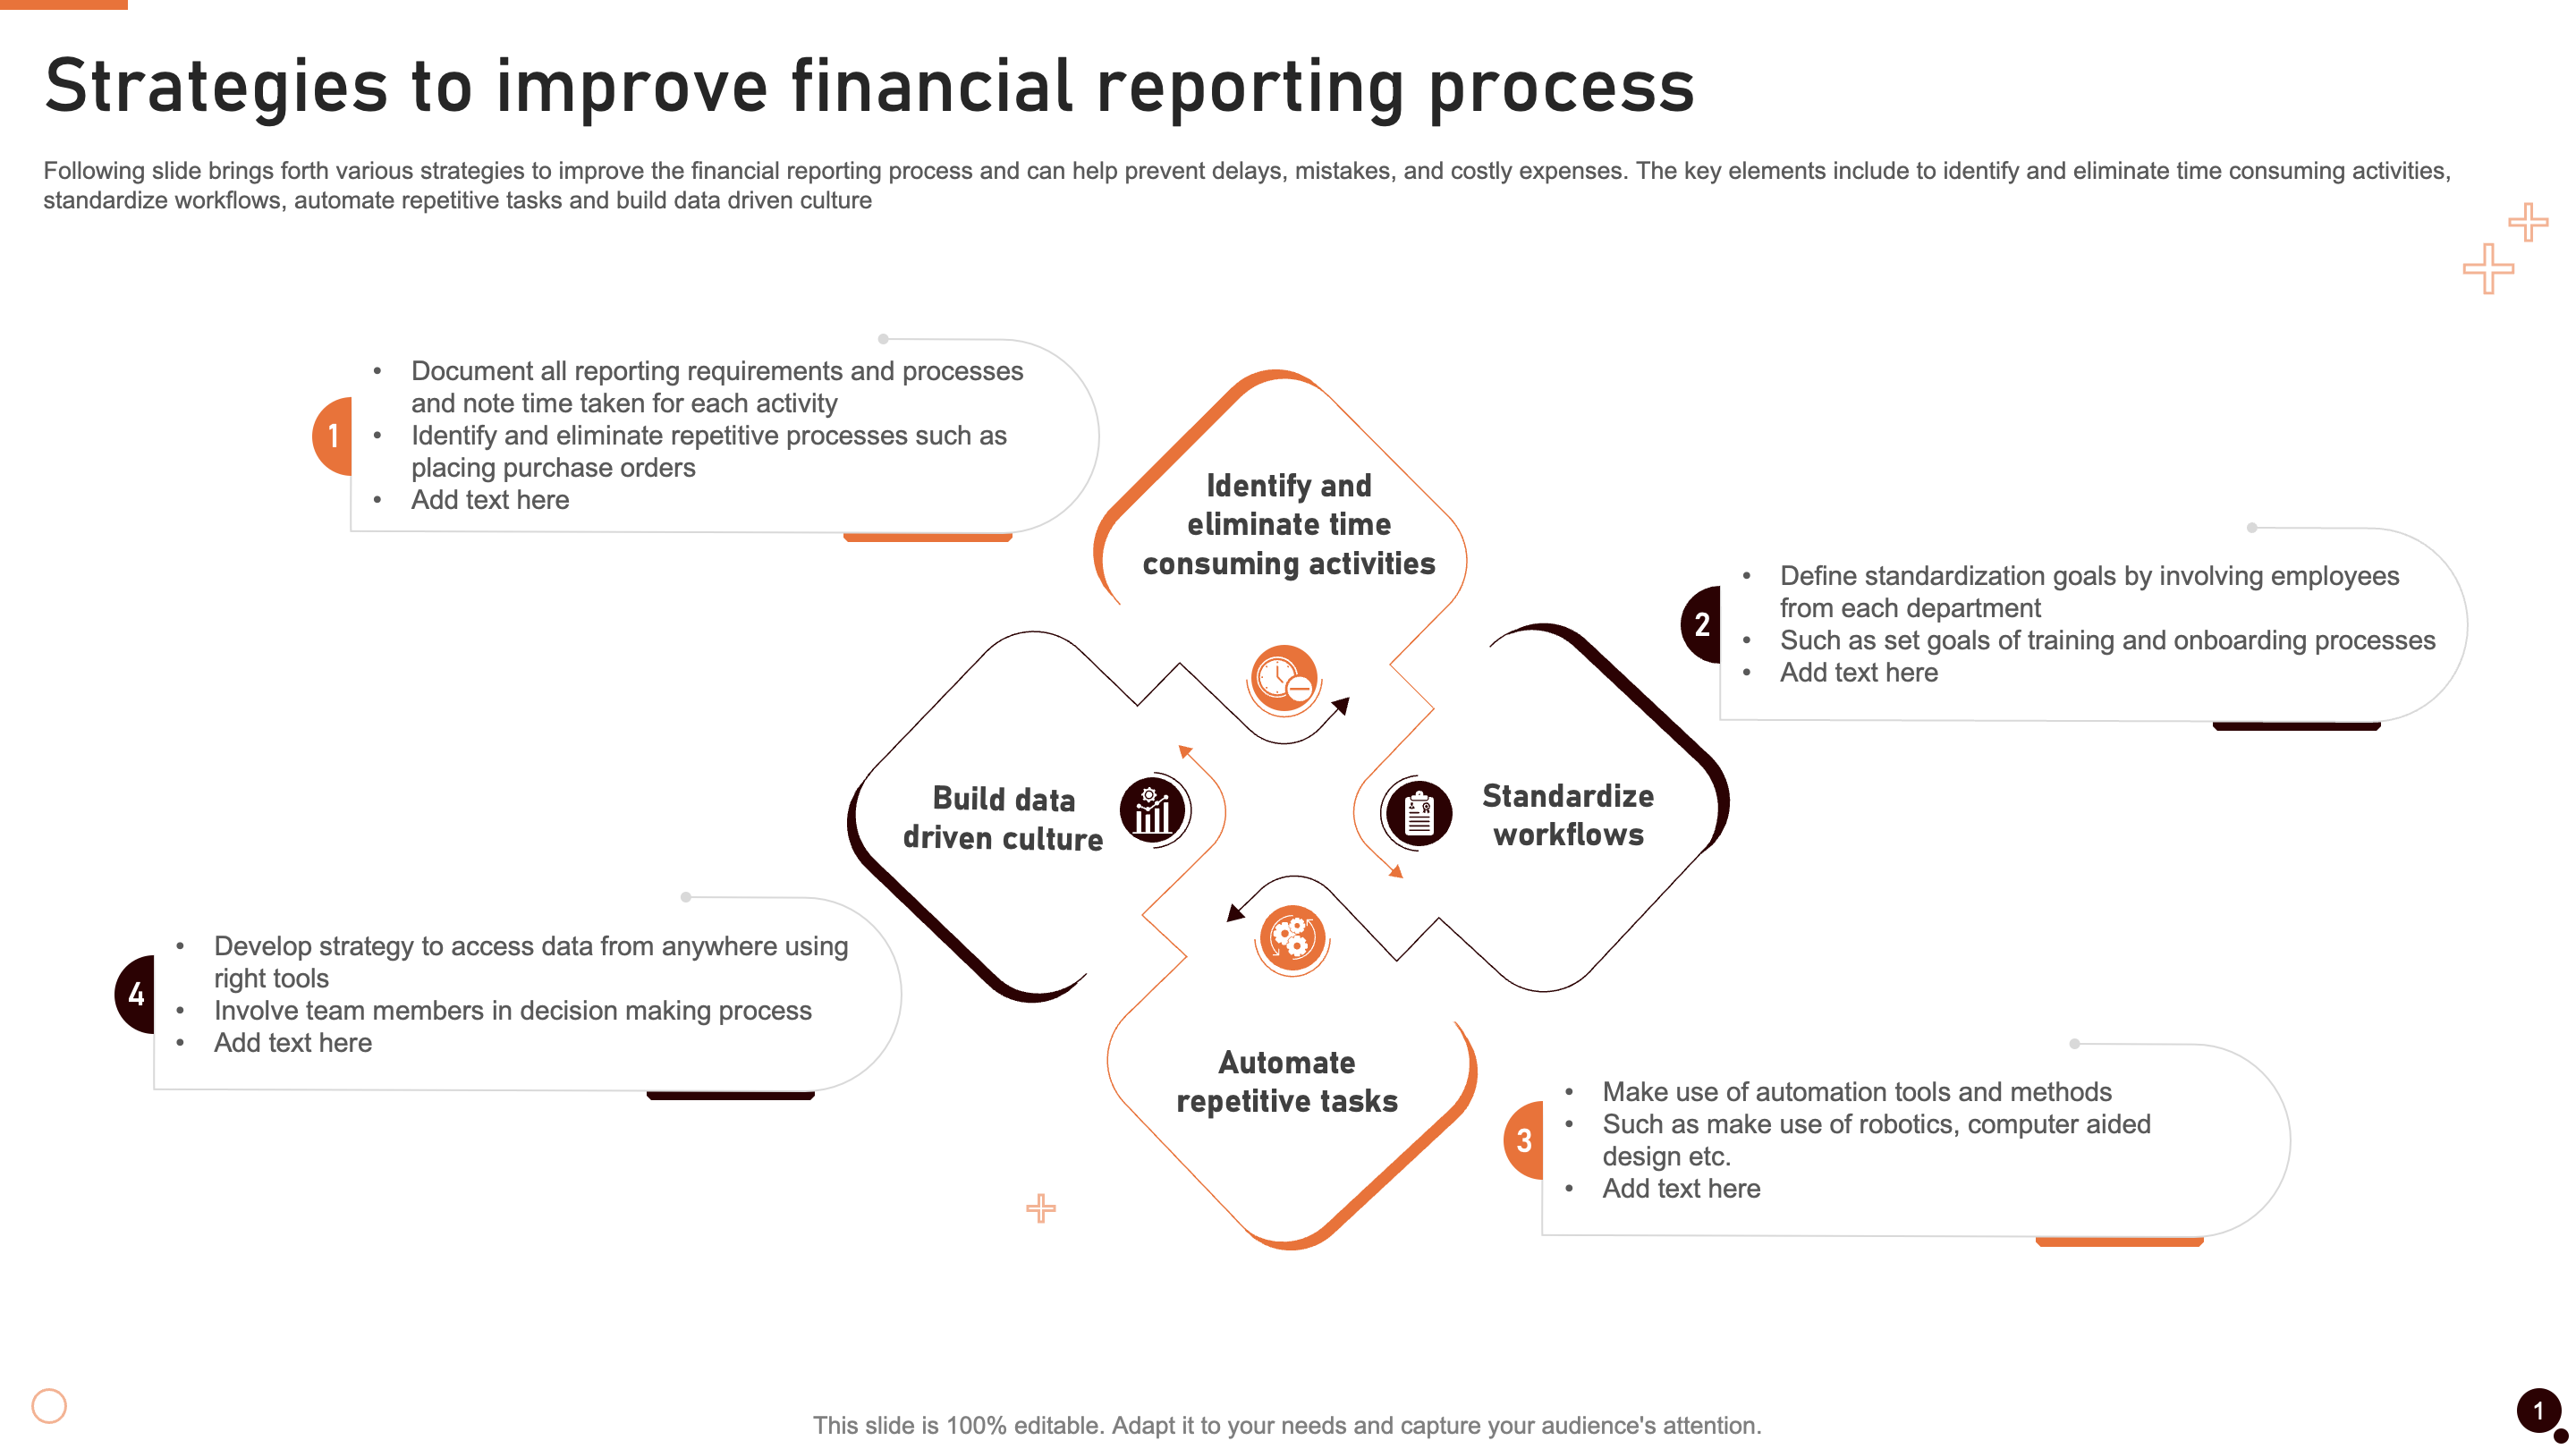 Strategies to Improve Financial Reporting Process